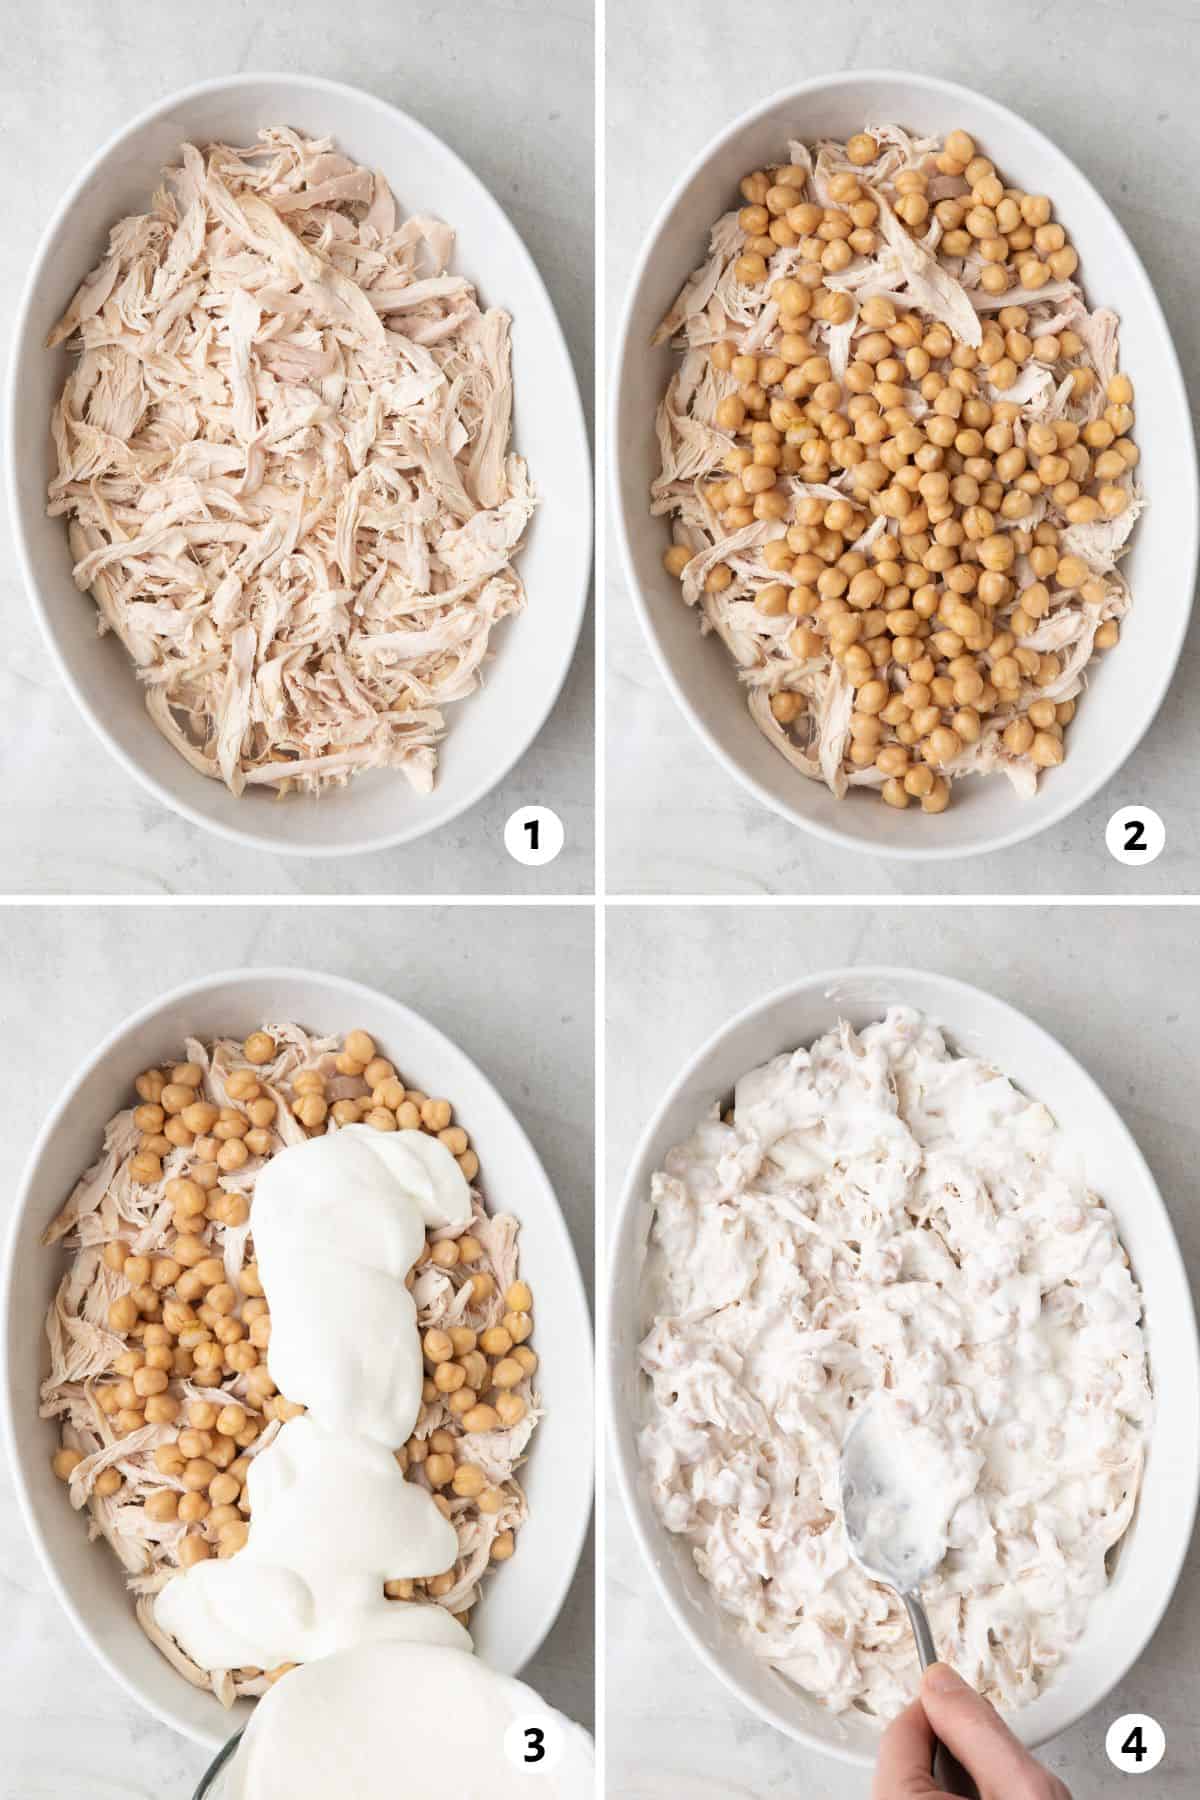 4 image collage layering ingredients in oval dish: 1-shredded chicken added, 2- chickpeas added, 3- yogurt sauce being poured over, 4- spoon tossing them together.